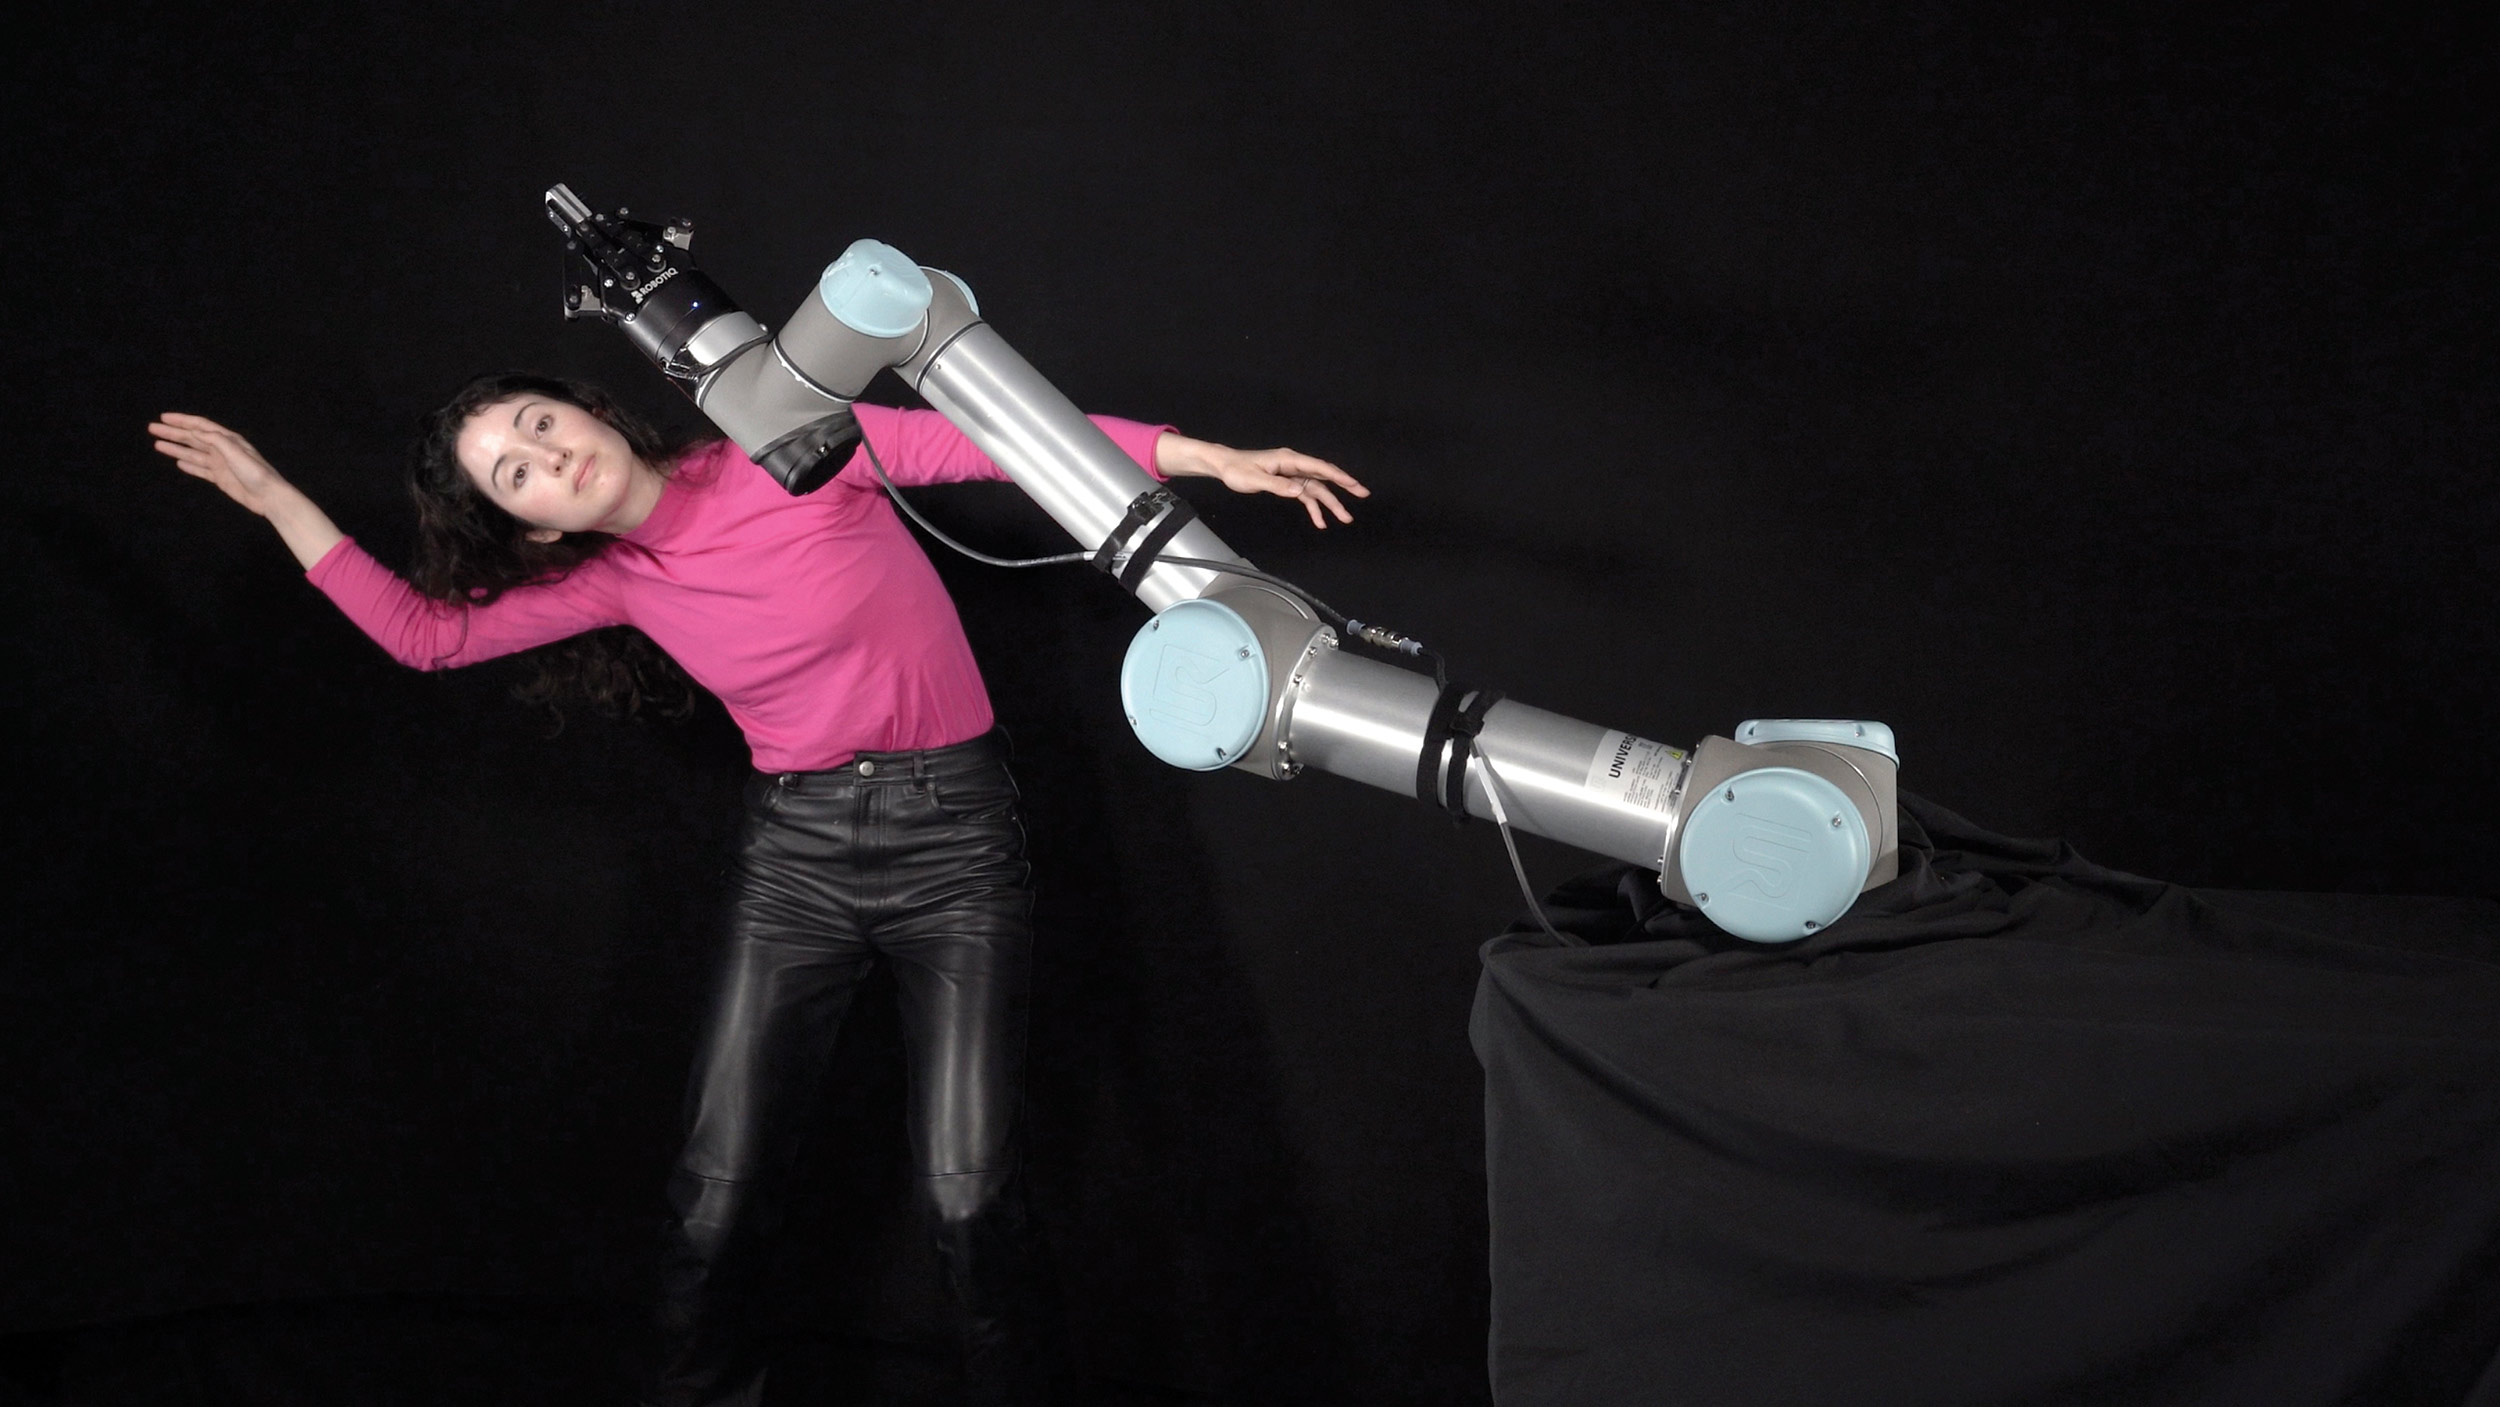 Dancer, roboticist and mechanical engineer Catie Cuan flails her arms, mimicking the movements of a UR5e robot arm, in the performance piece "Breathless."